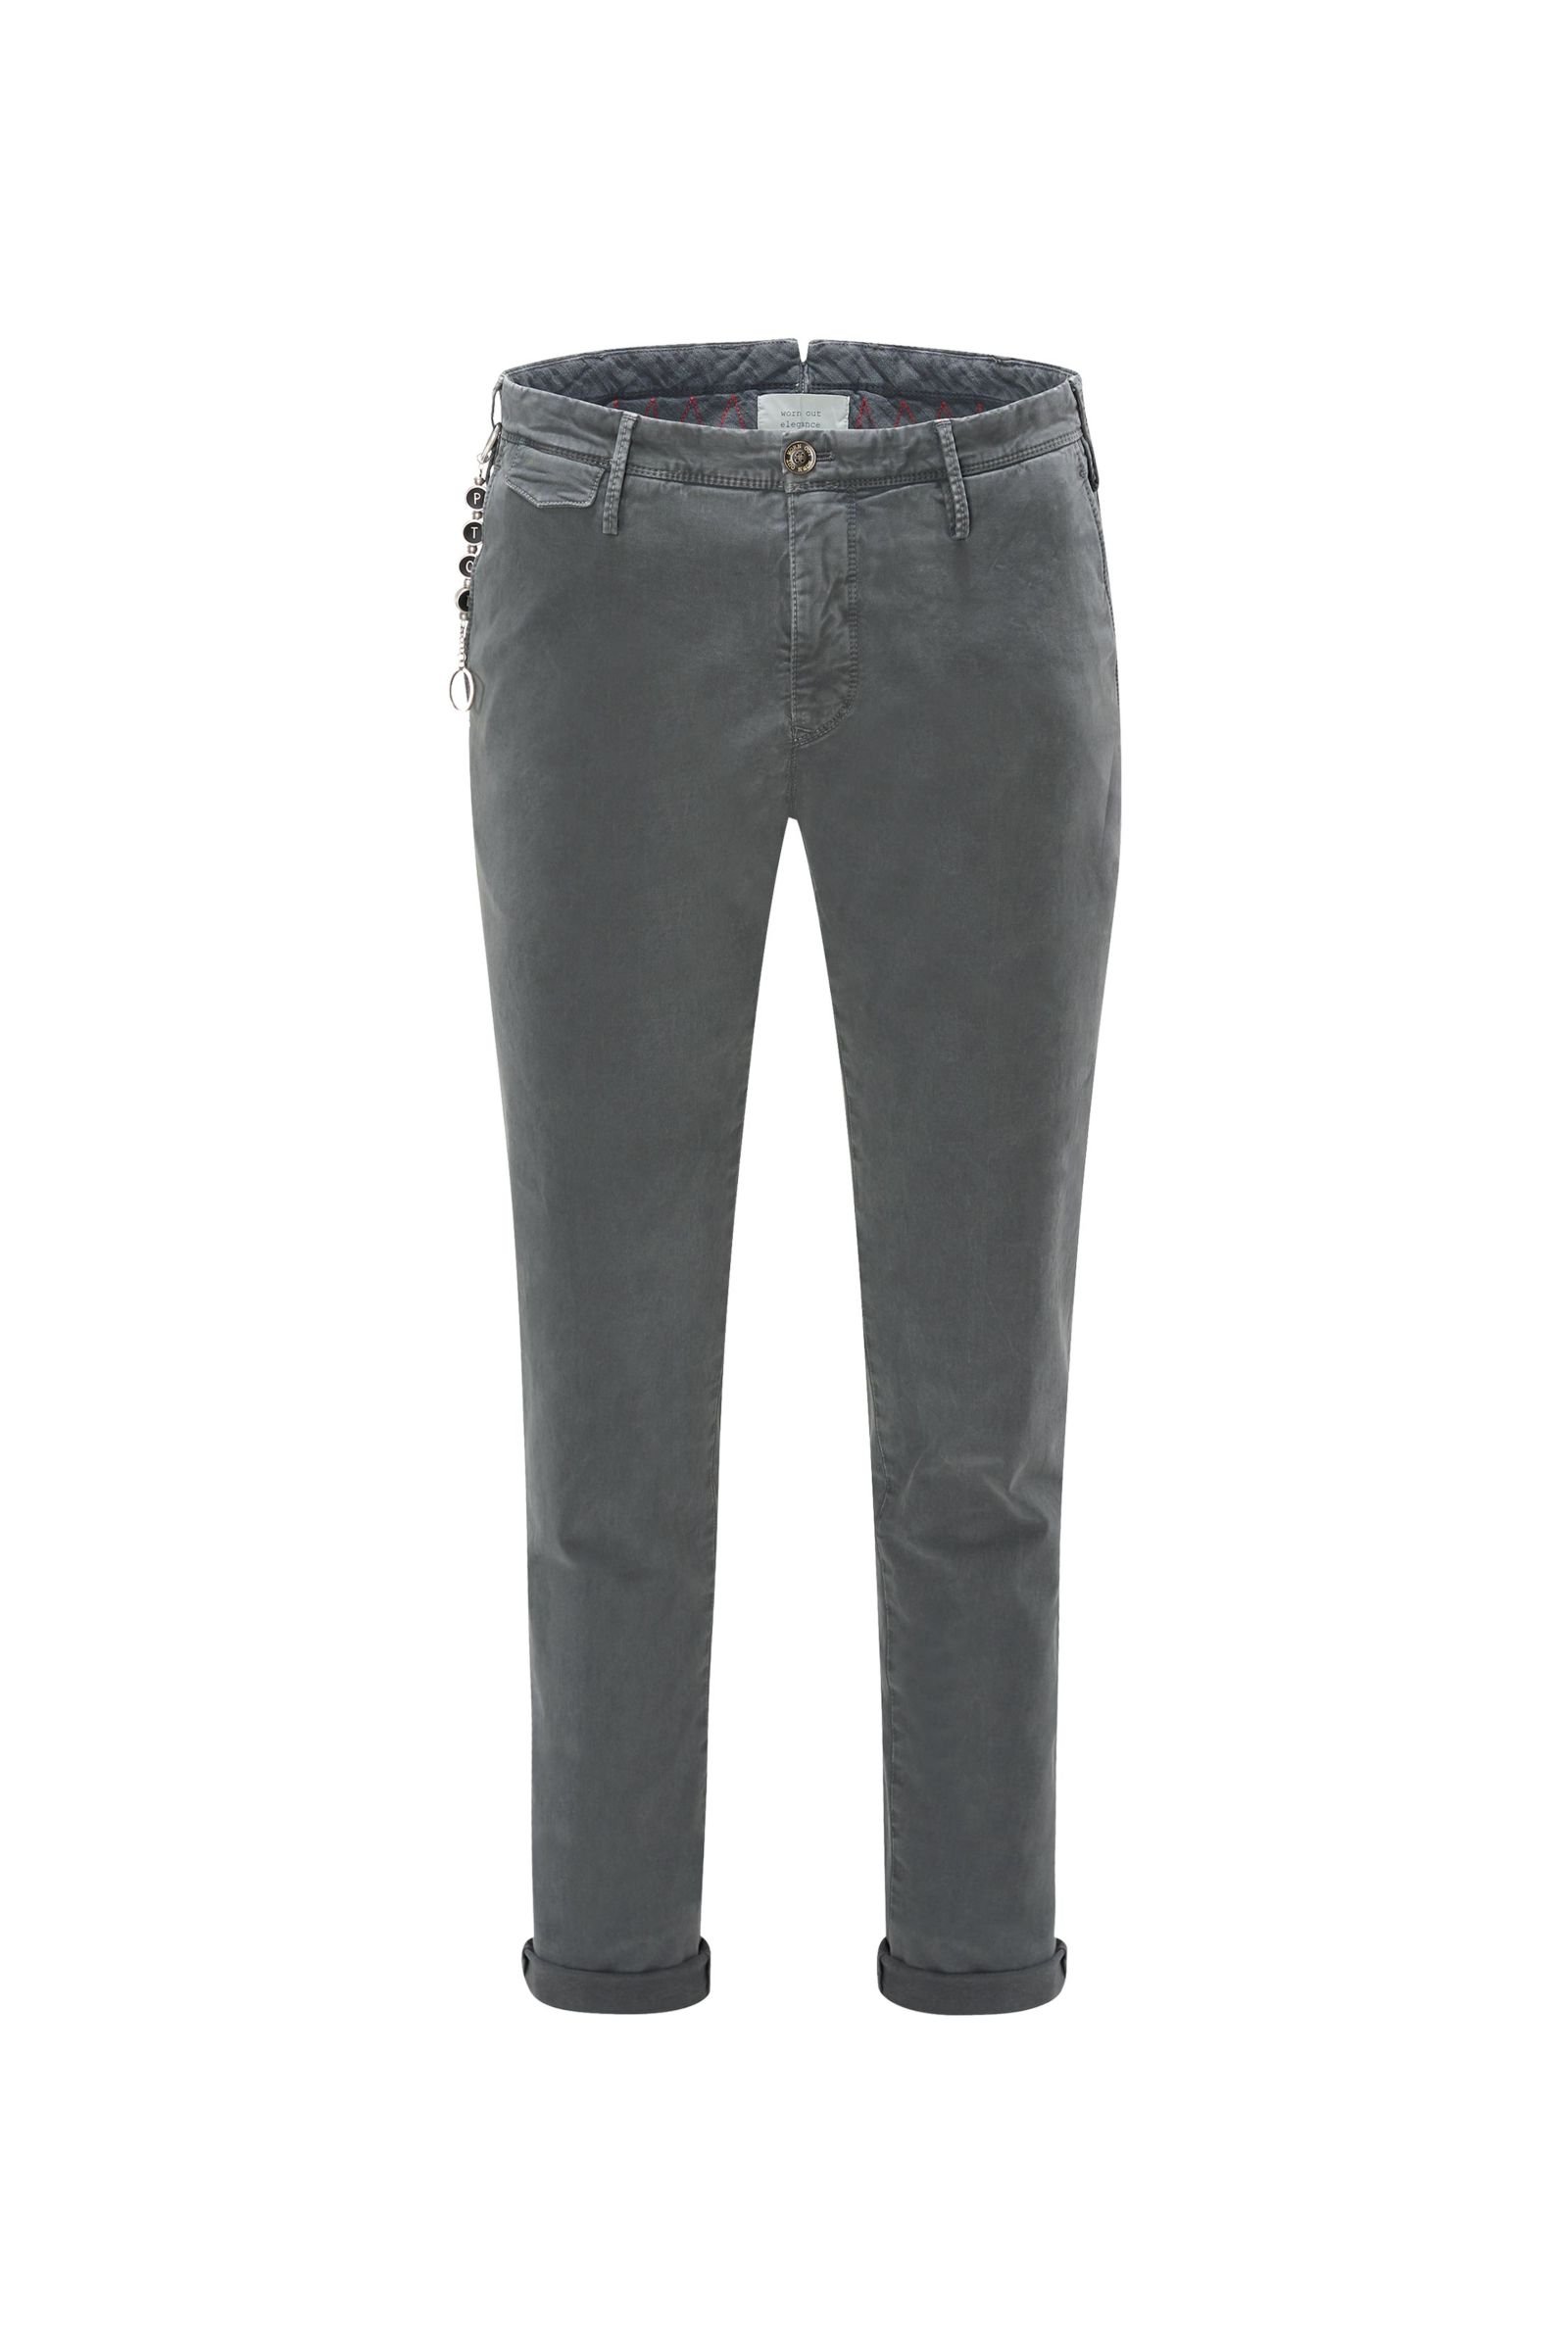 Cotton trousers 'Worn out Elegance' grey